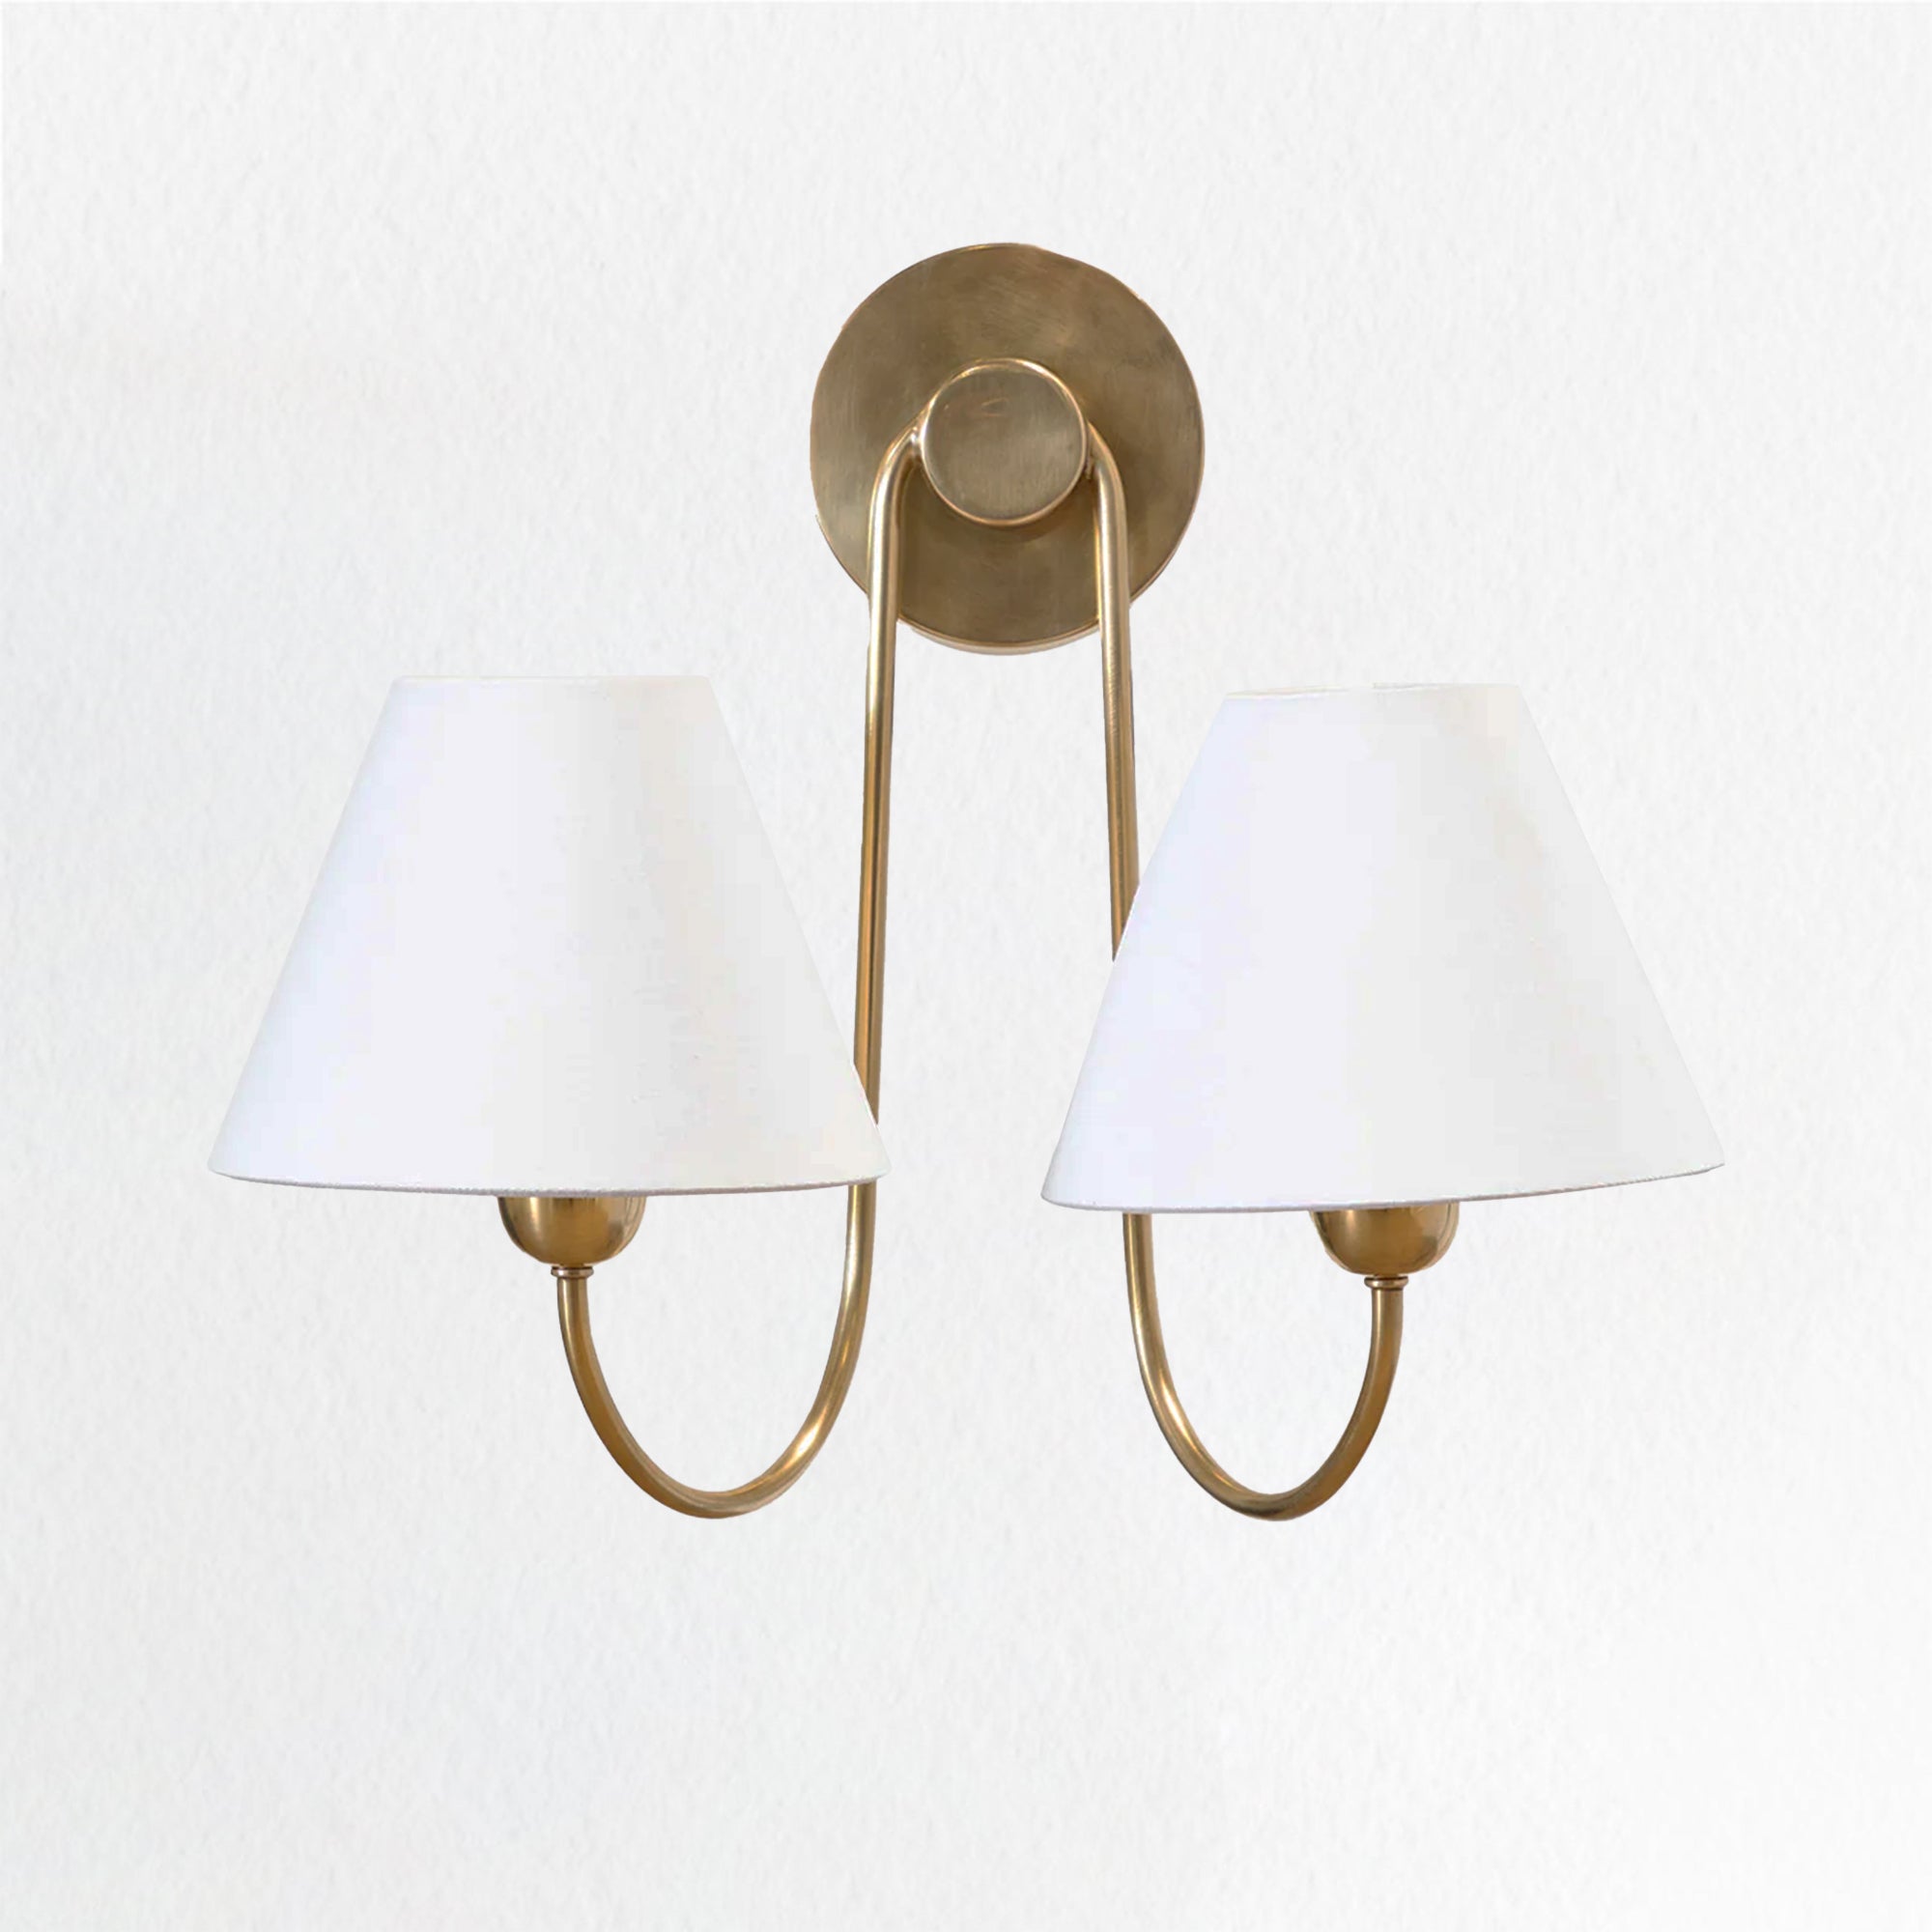 Wainwright Double Swoop Sconce